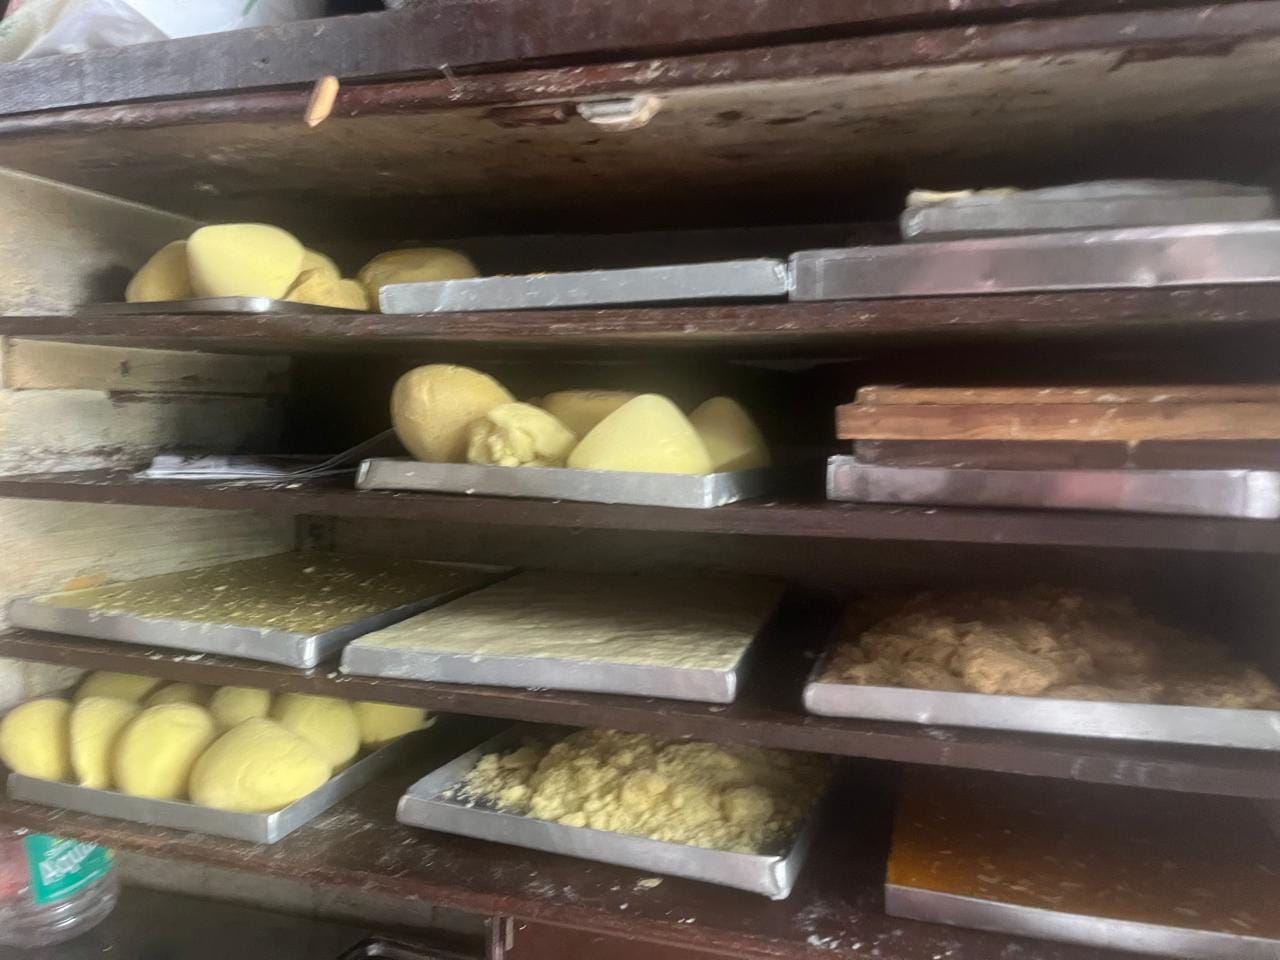 Gangtok's Dey Sweets Shop Inspected , Found Pests and Rodents